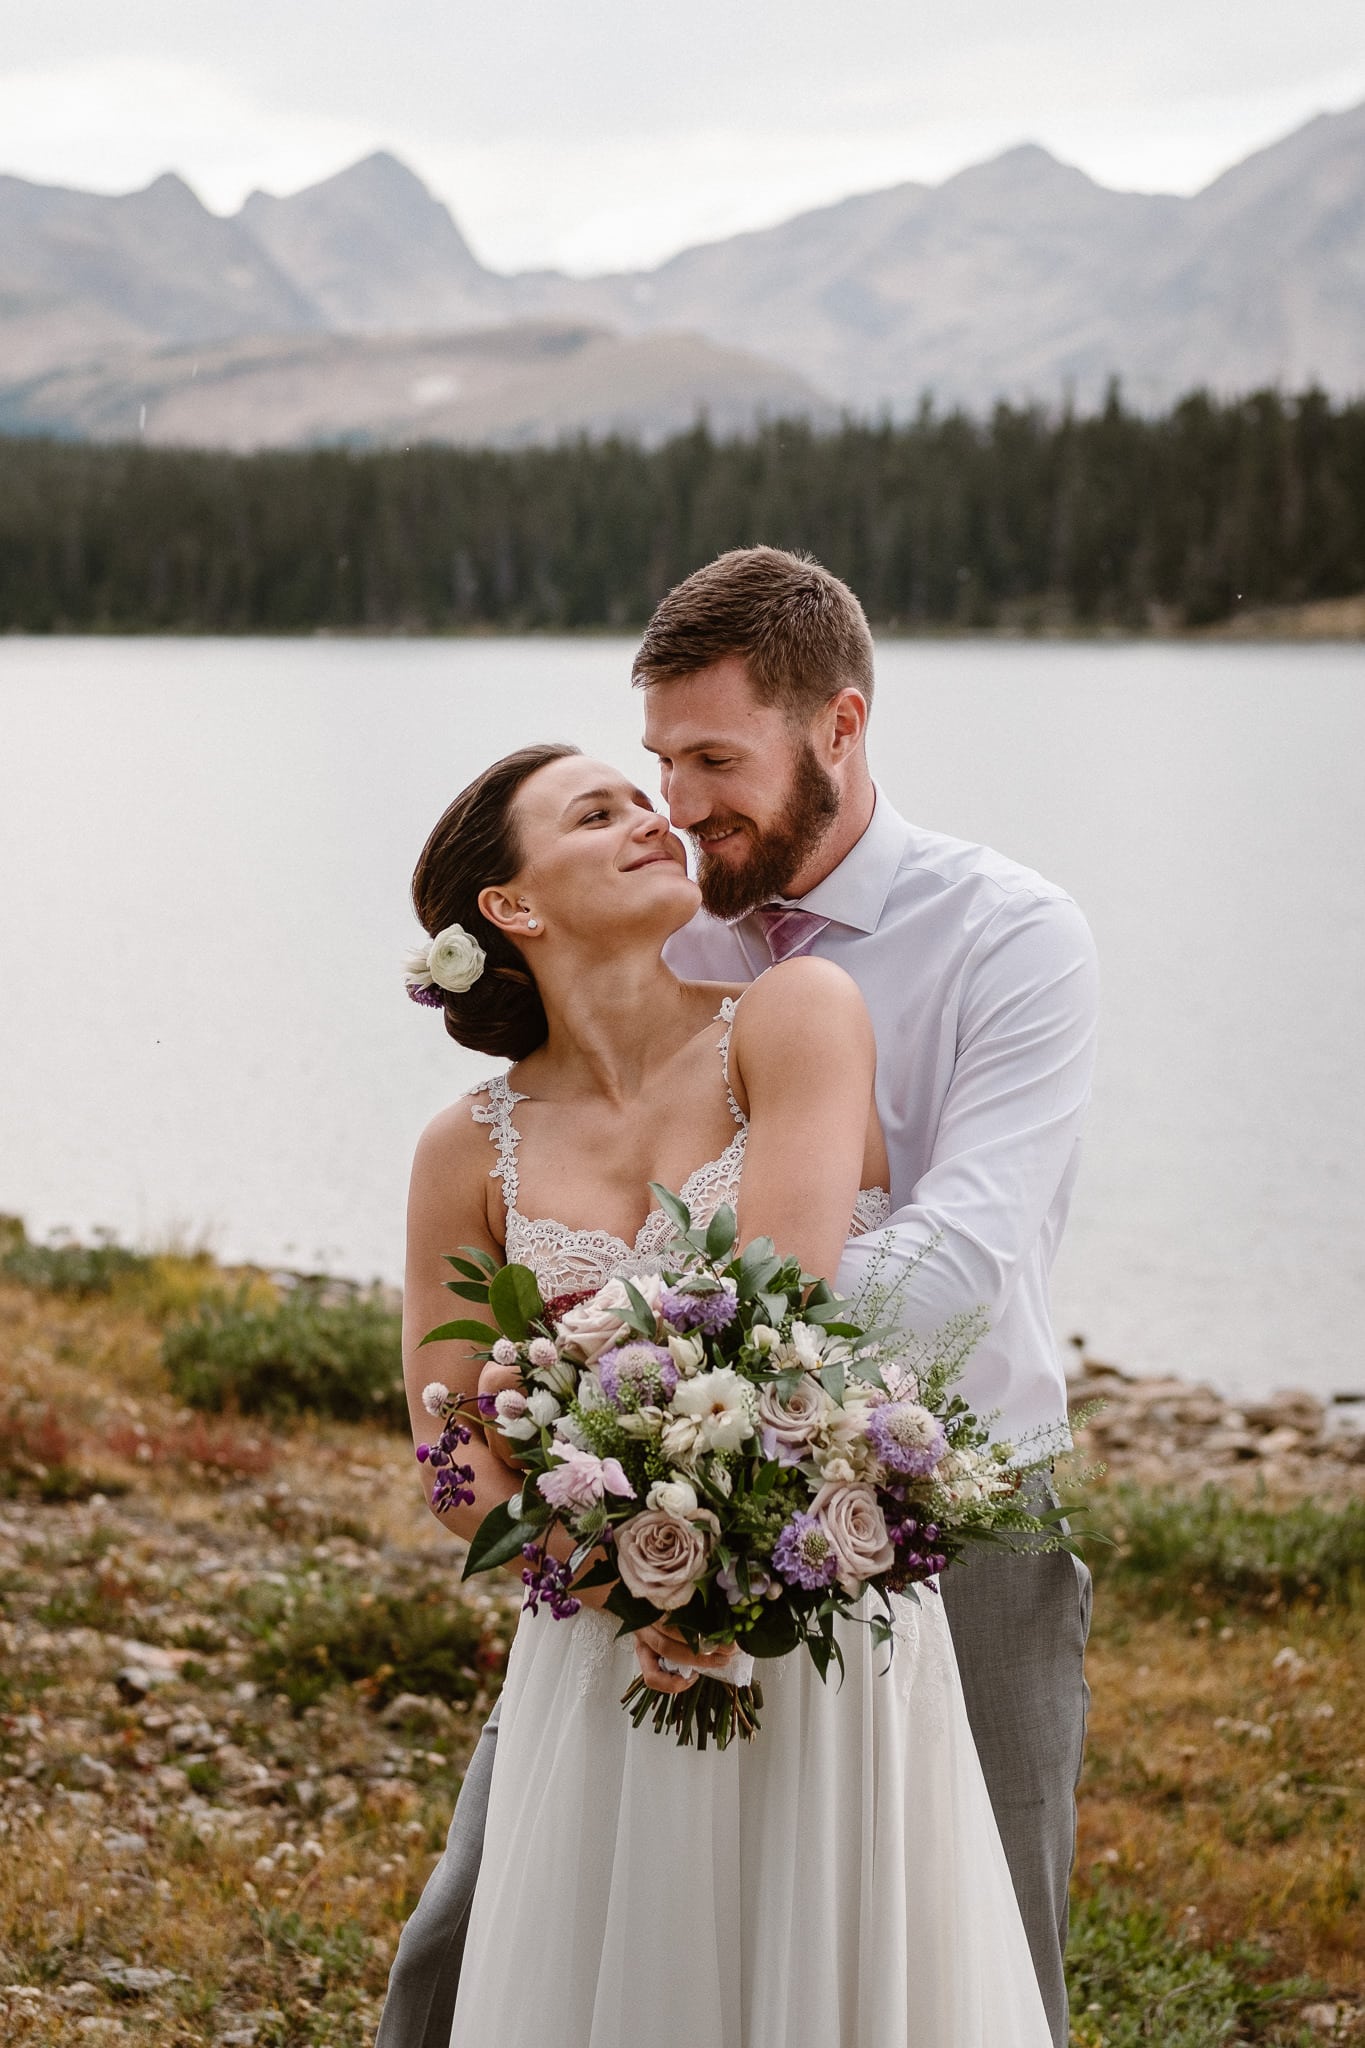 Colorado mountain elopement photographer, alpine lake adventure wedding, Boulder wedding photographer, bride and groom portraits in mountains, laidback boho wedding, hiking elopement, bouquet by Fawns Leap, pale pink and purple florals